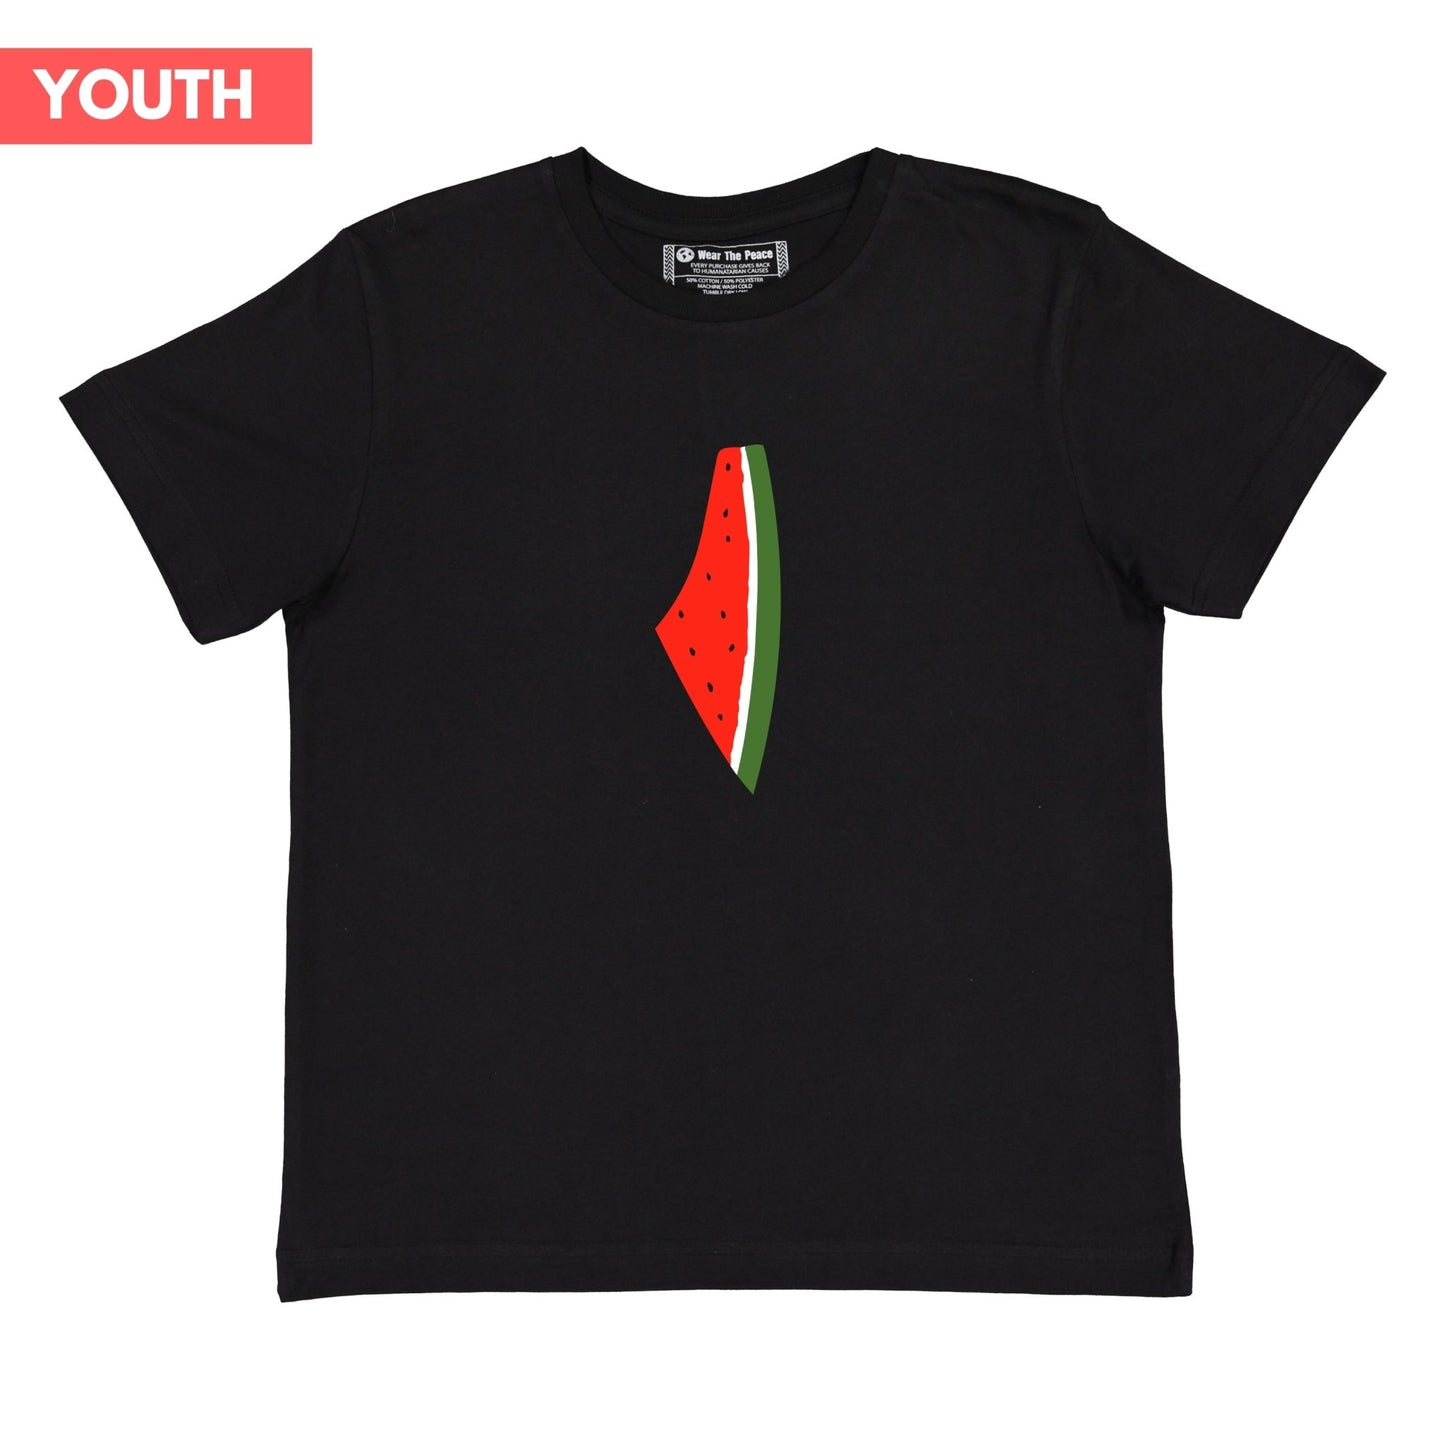 Youth Freedom Melon Tee Wear The Peace Short Sleeves XS